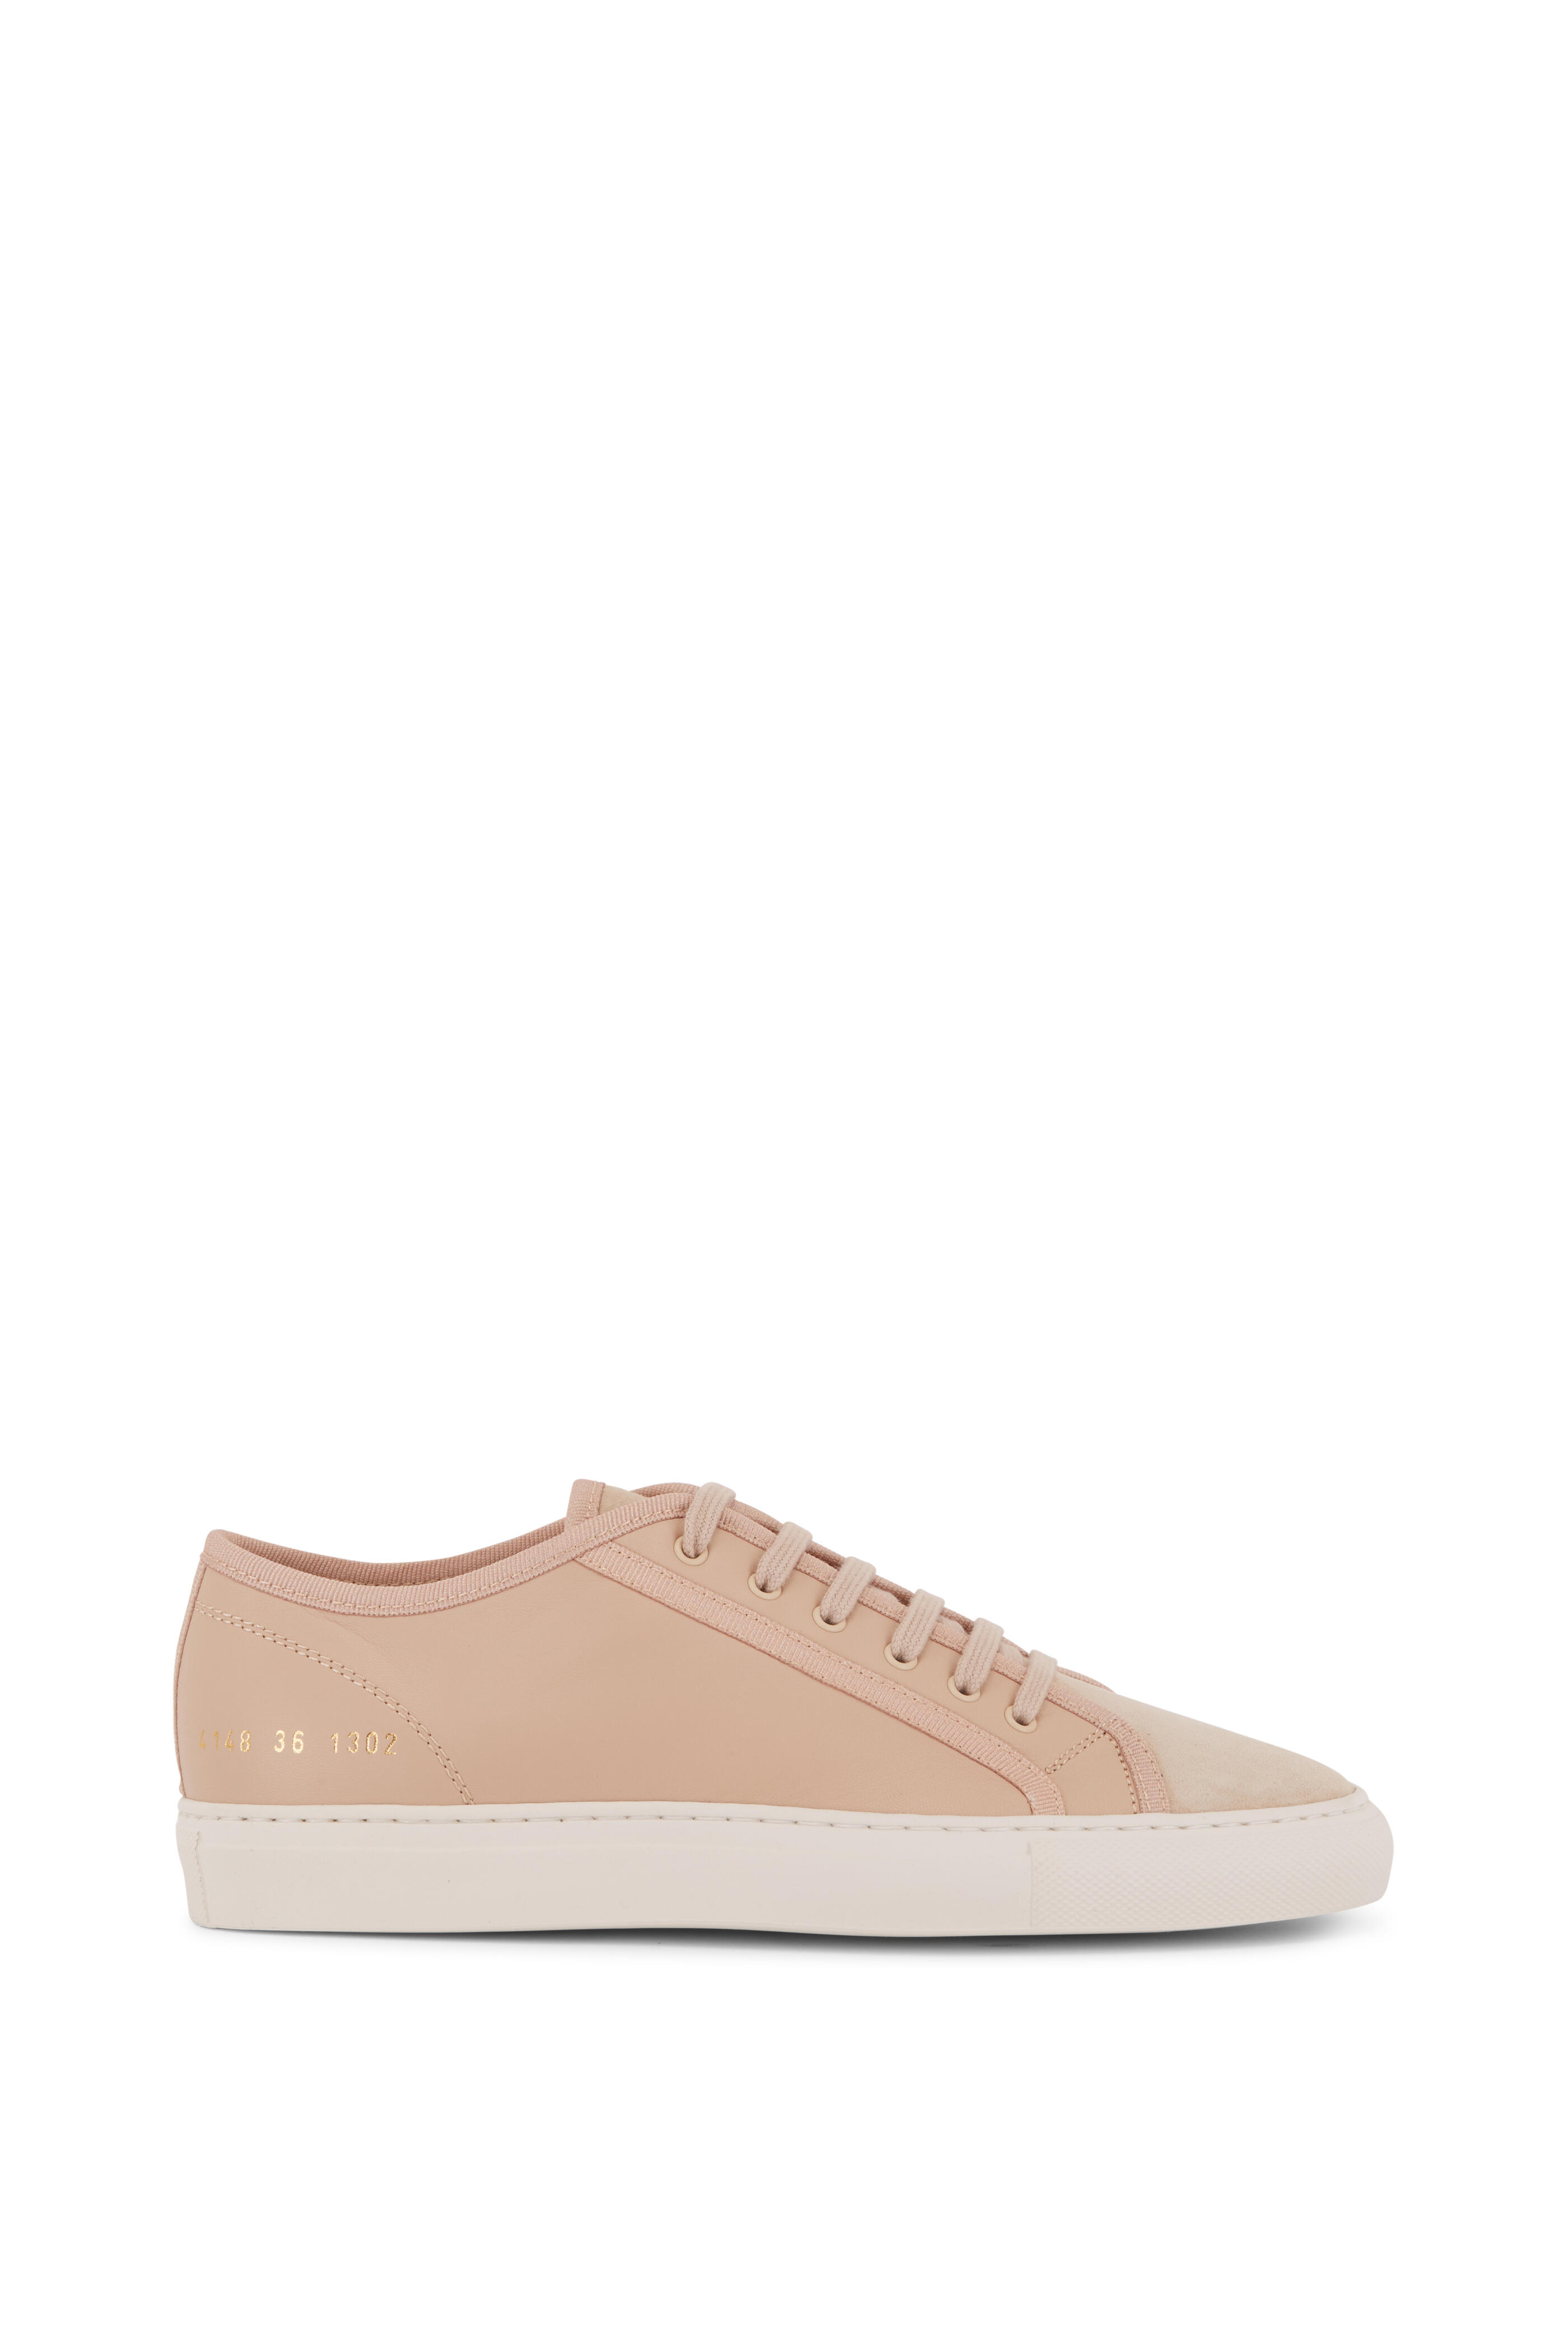 Woman by Common Projects - Tournament Tan Leather Low Top Sneaker